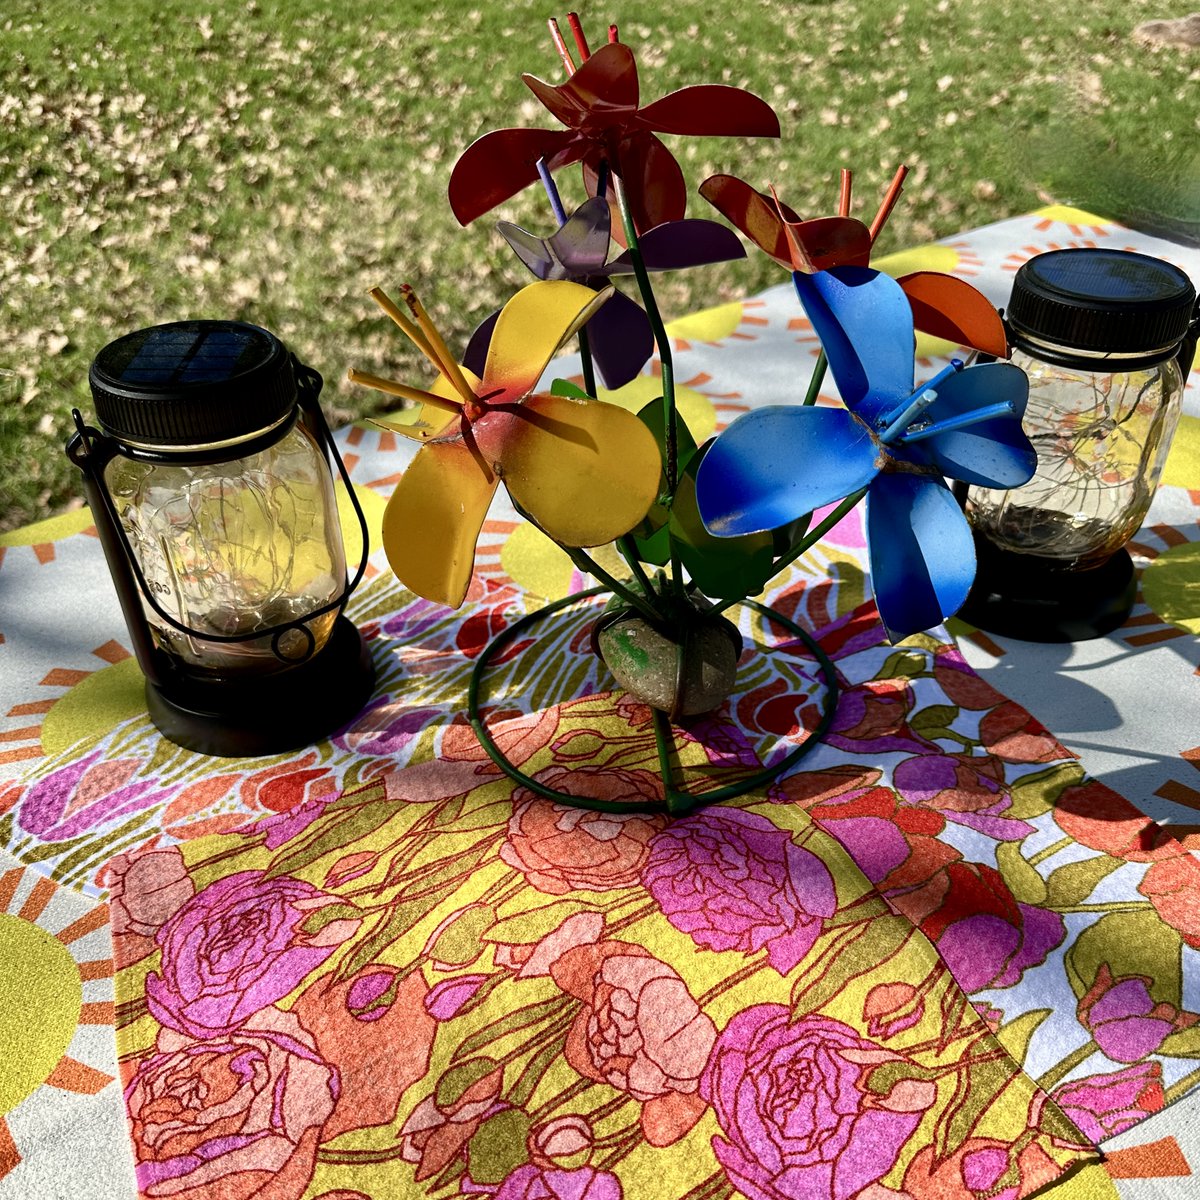 It’s Spring! Elevate your kitchen style with the bright, colorful @GeometryHouse towels. They're beautiful AND #ecofriendly - made from post-consumer recycled materials and super absorbent. I LOVE the new picnic blanket. Use code Wander15 for 15% off geom.crrnt.app/Wander15